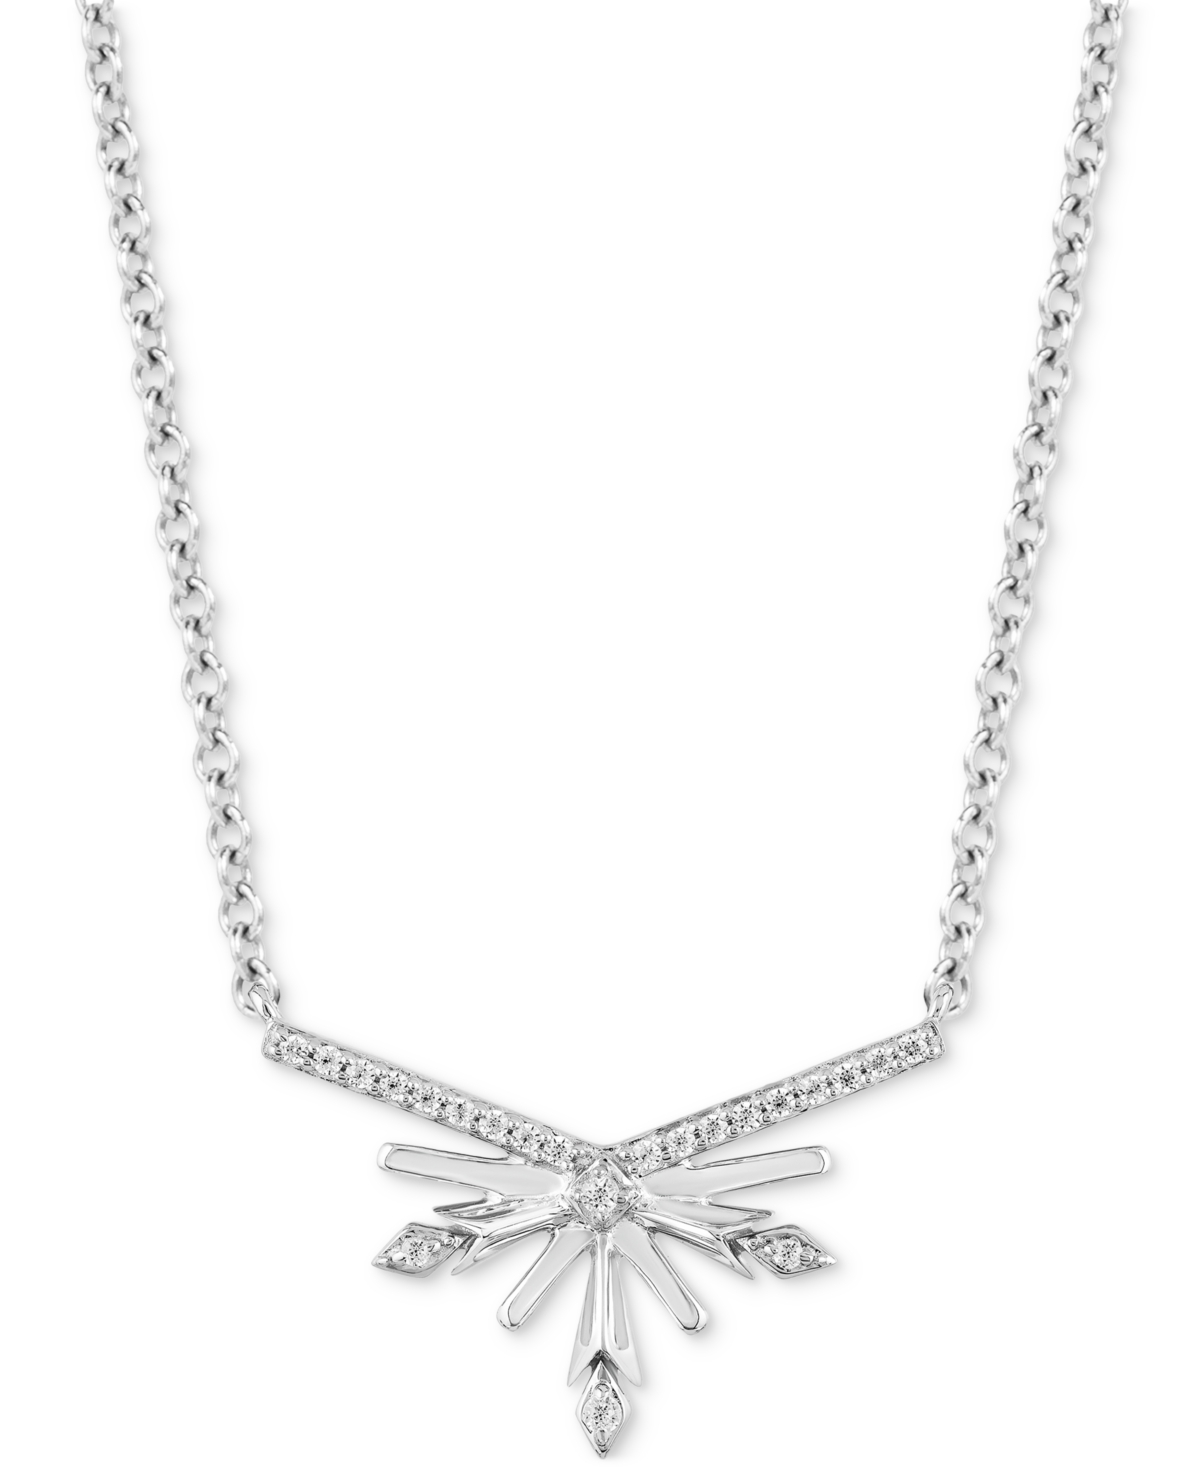 Enchanted Disney Fine Jewelry Diamond Elsa Snowflake Pendant Necklace (1/10 Ct. T.w.) In Sterling Silver, 16" + 2" Extender